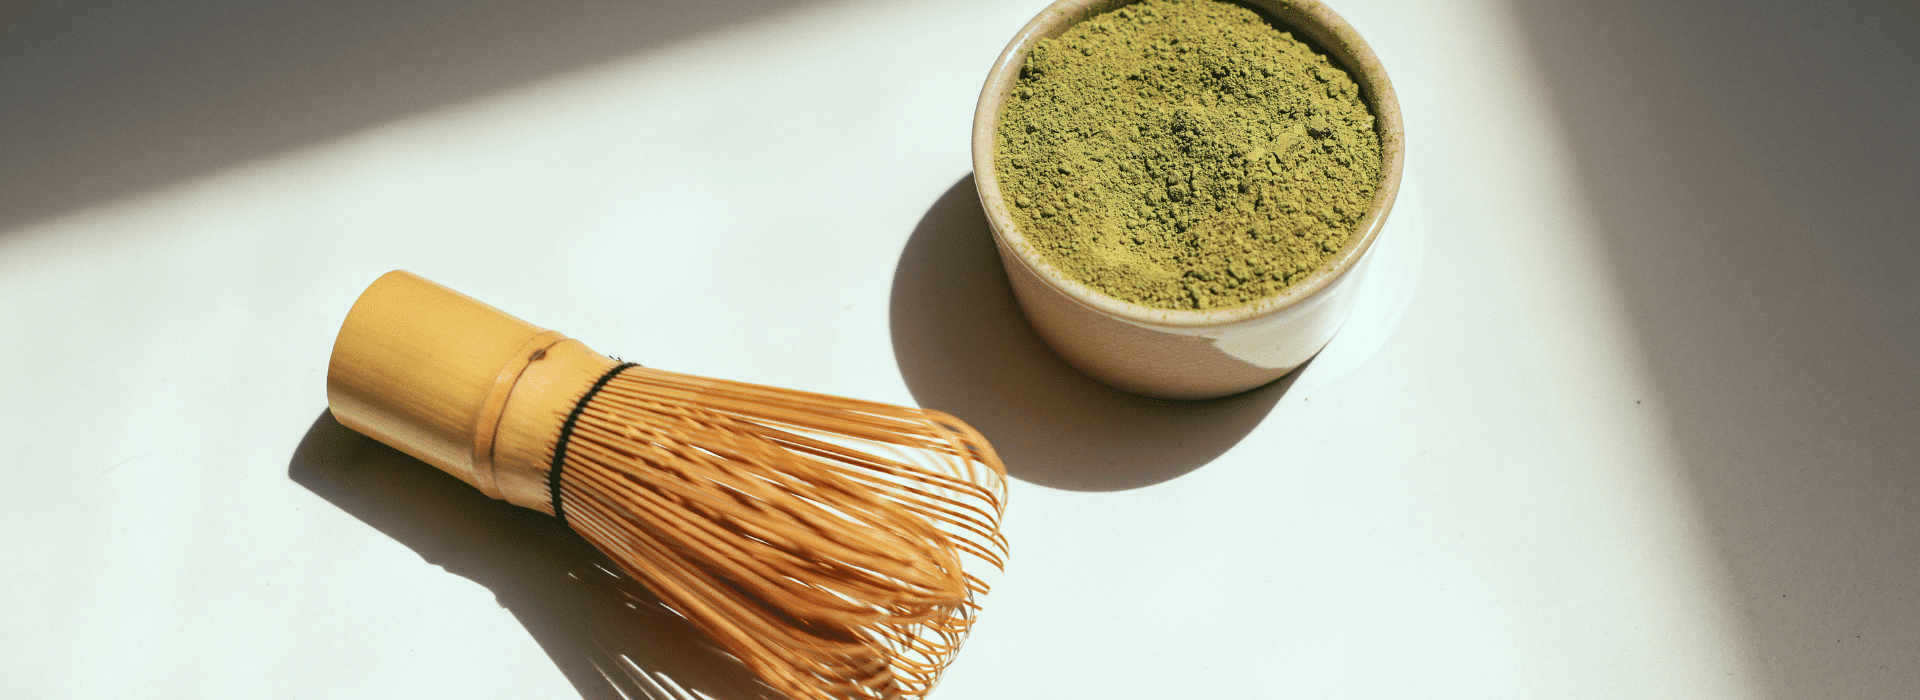 Our Key Ingredients Blog | Matcha Tea and Whisk | Shine Body & Bath